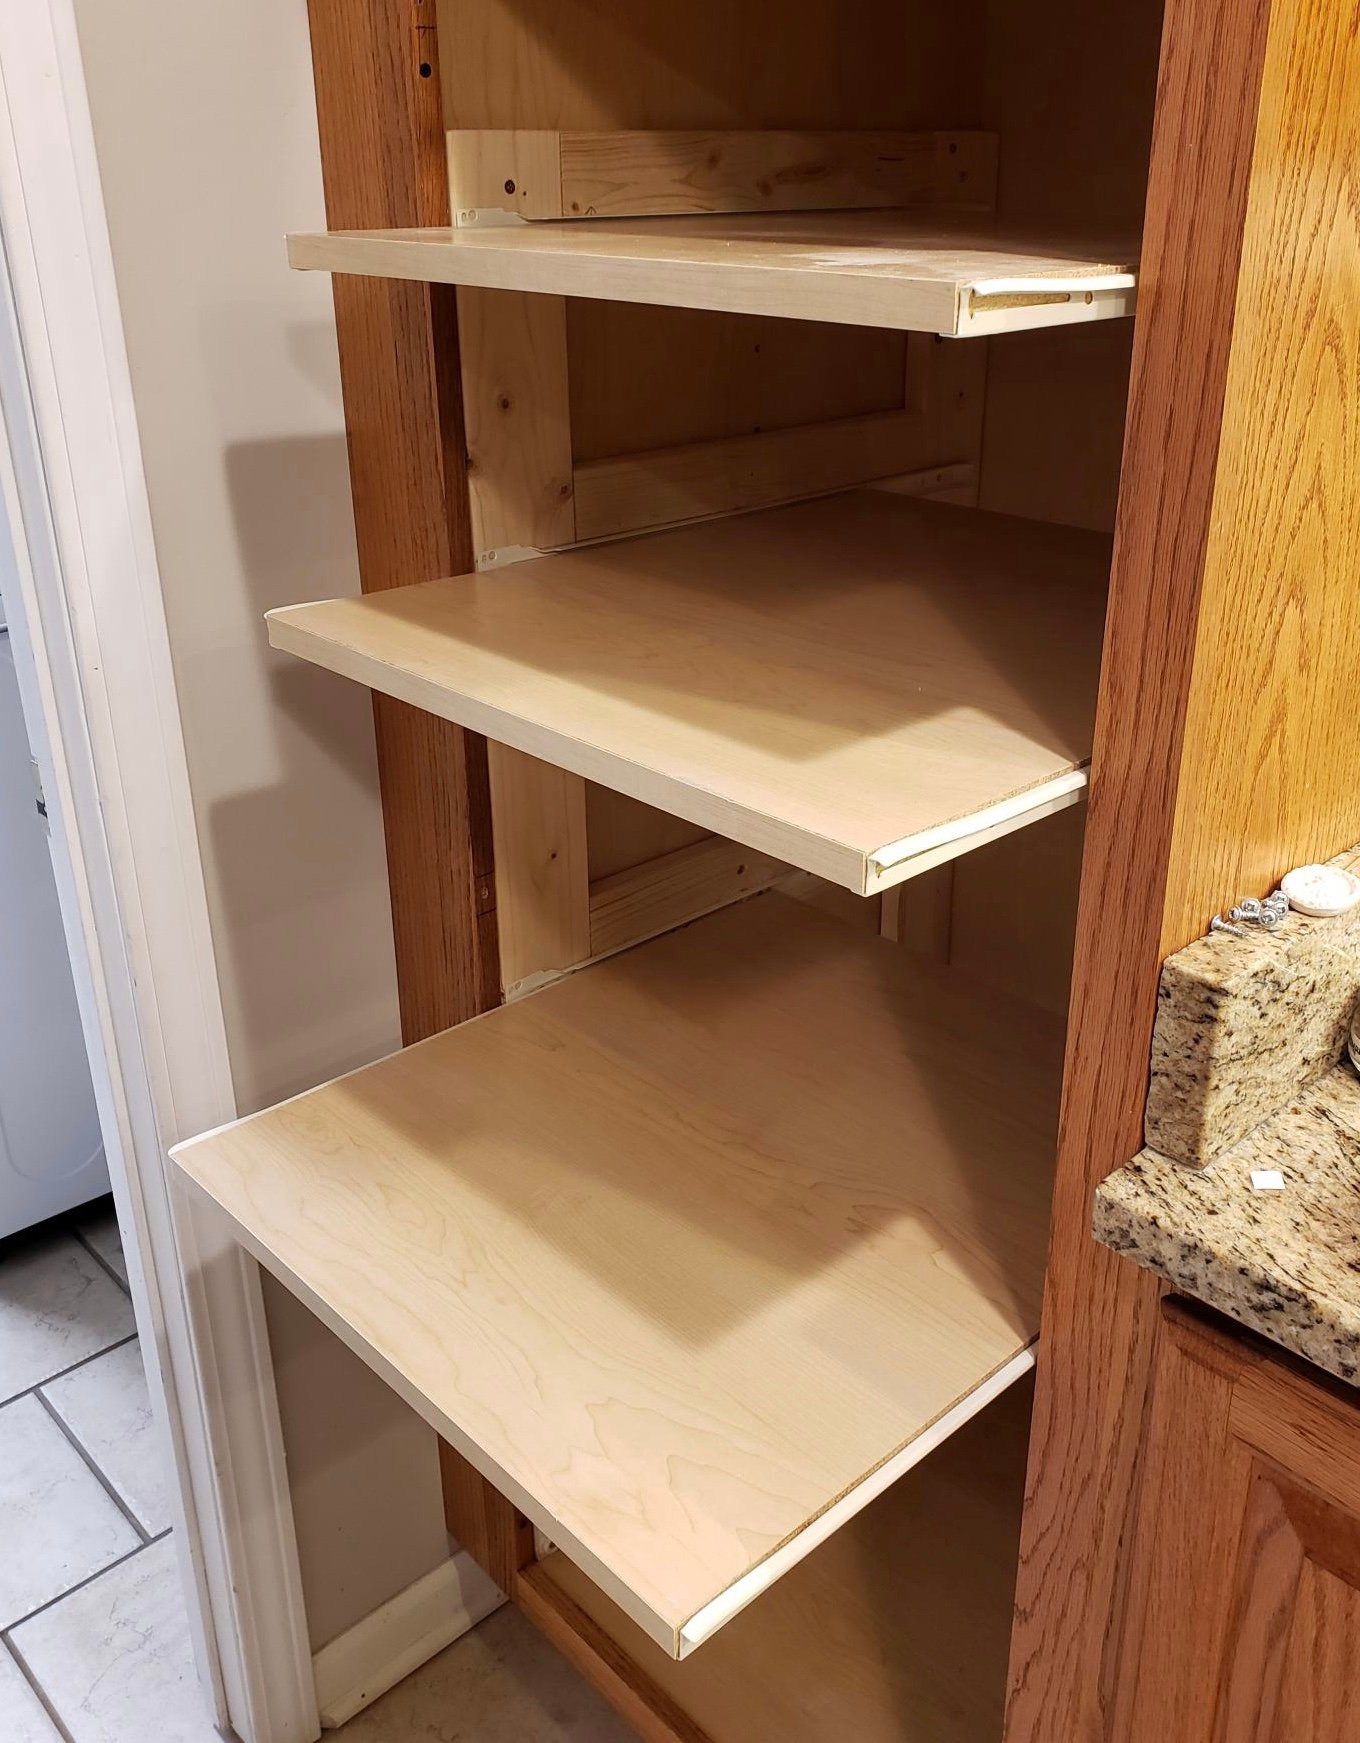 Pull Out Shelves Ana White, How To Make Pull Out Shelves For Cabinets